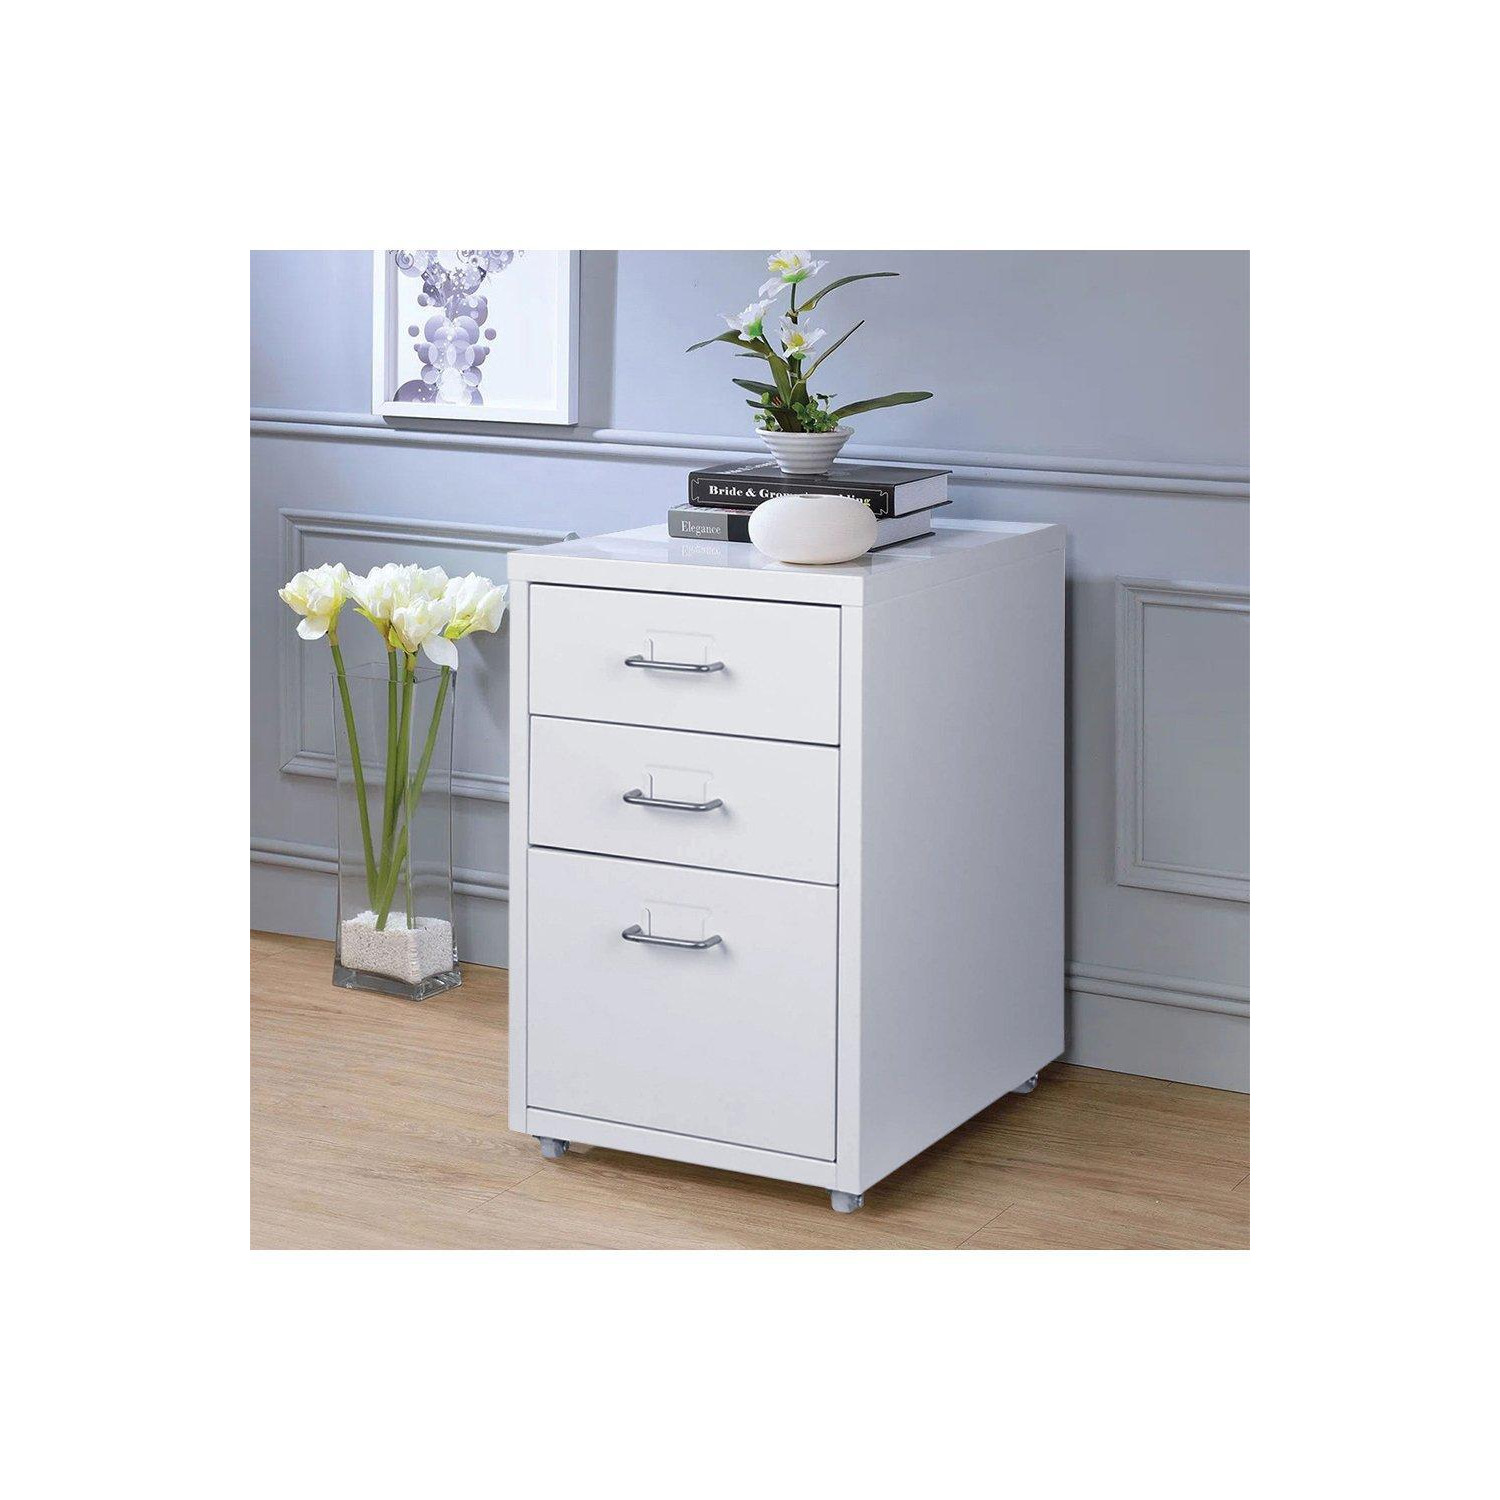 Metal File Cabinet Office Organizer with Wheels - image 1